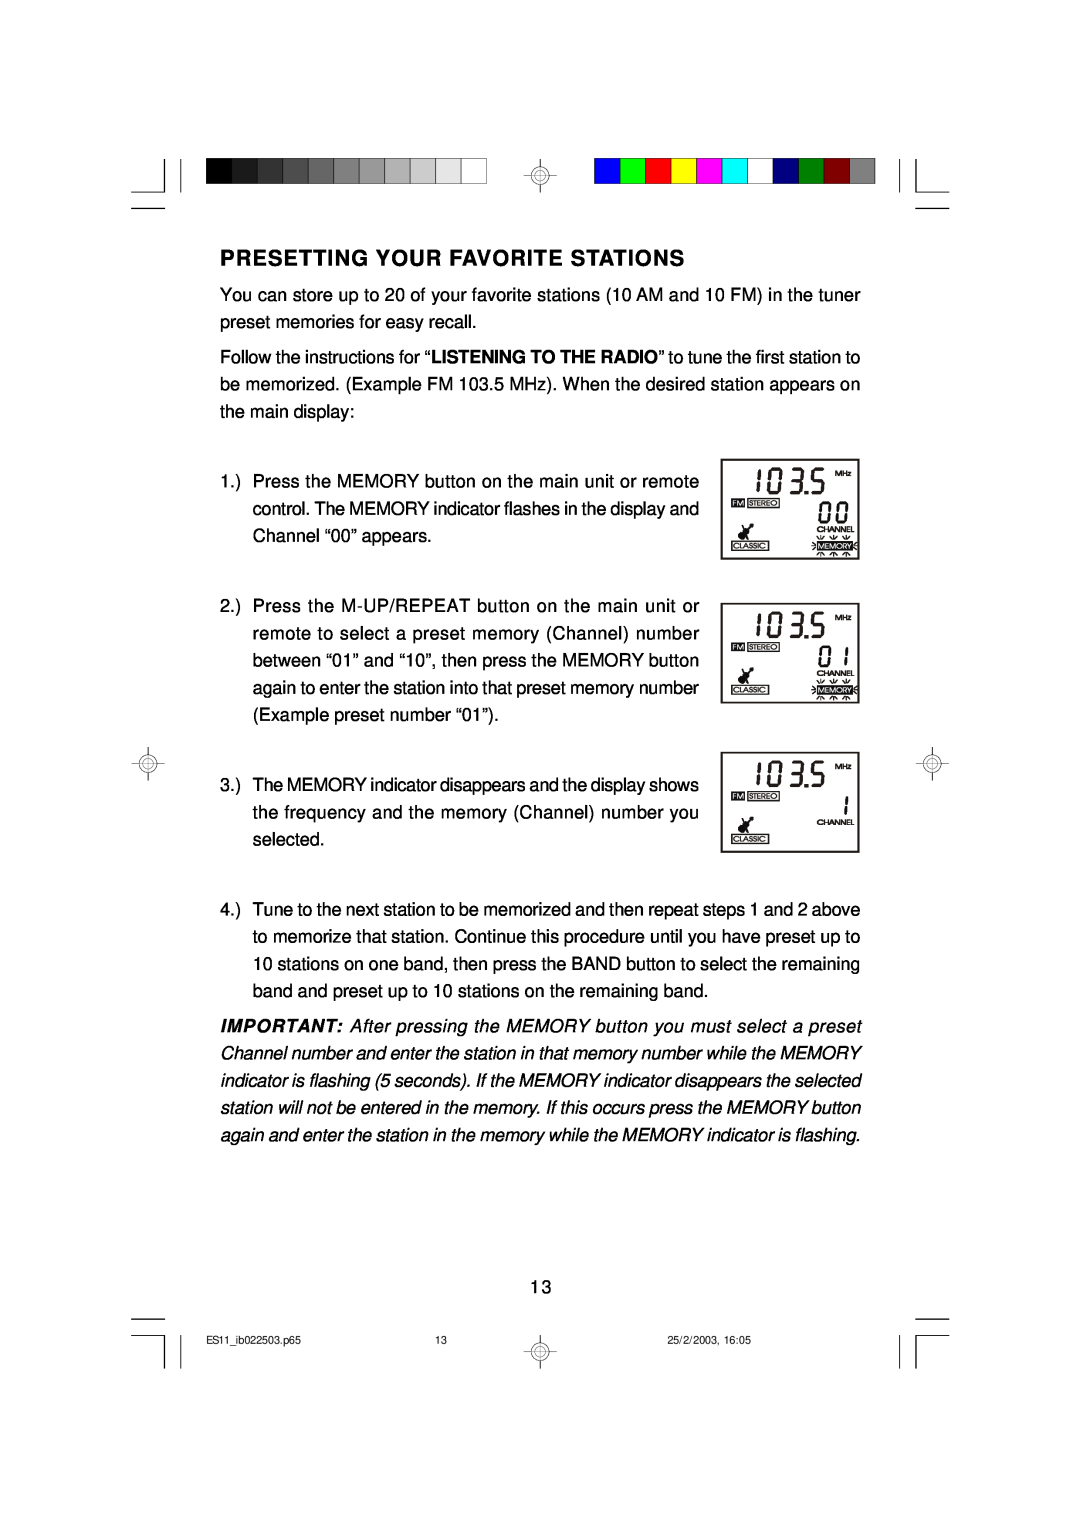 Emerson ES11 owner manual Presetting Your Favorite Stations 